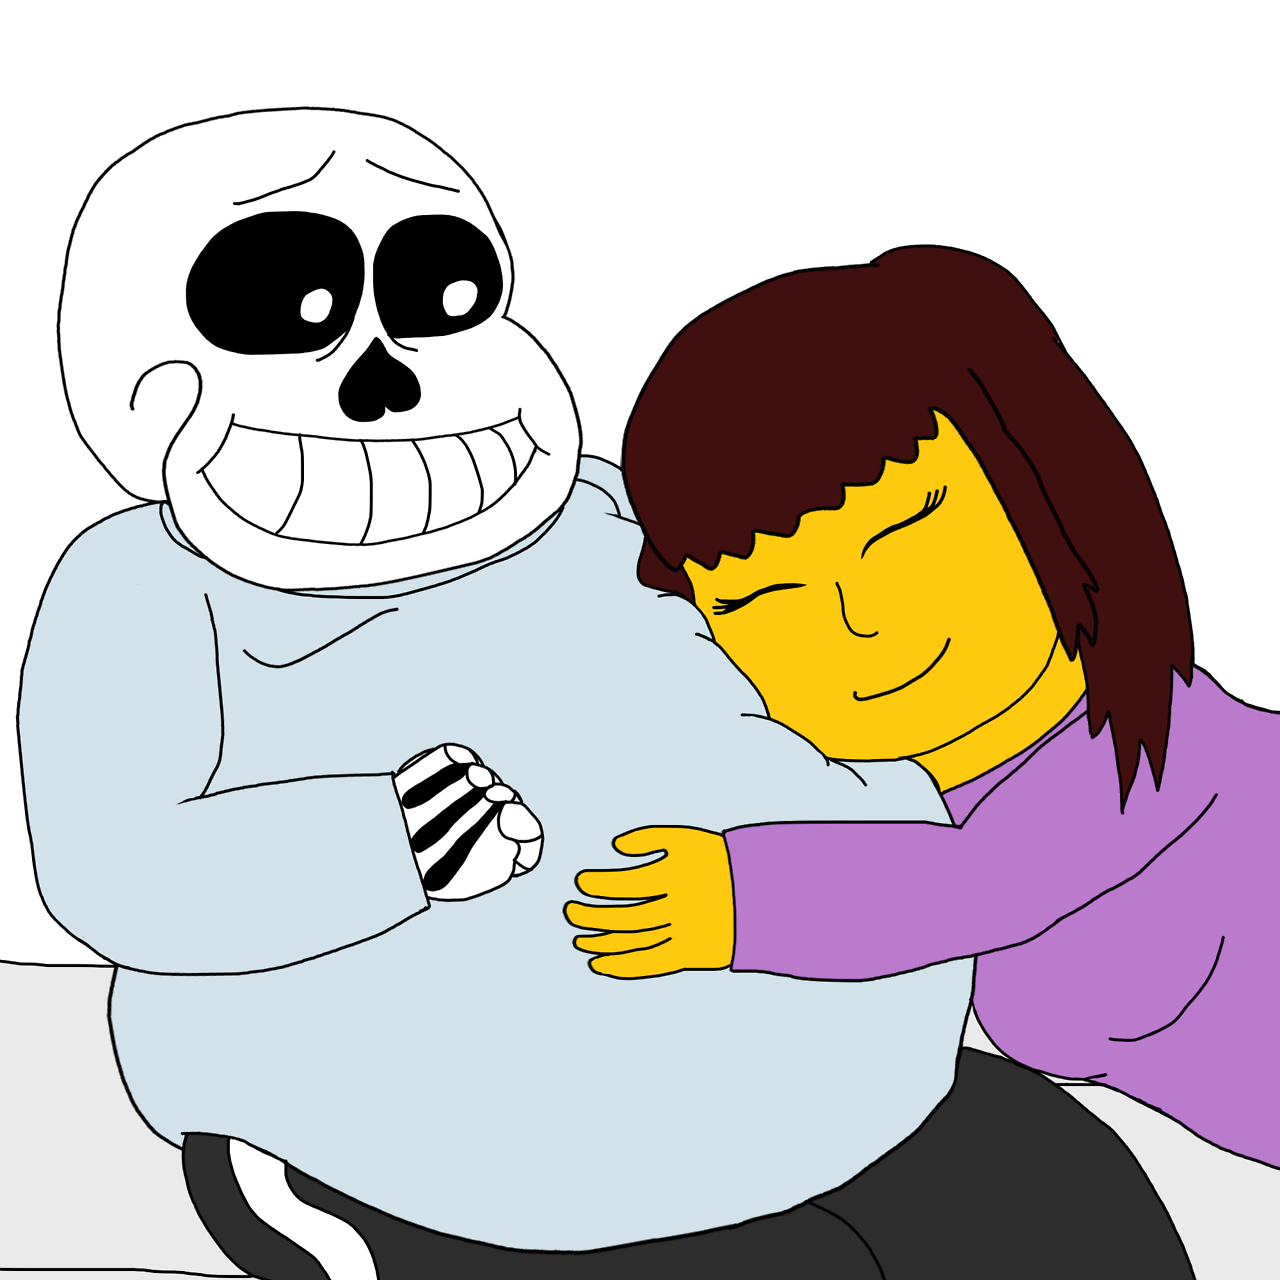 Sans Is Fat Just Something A Little Shippy For Change.